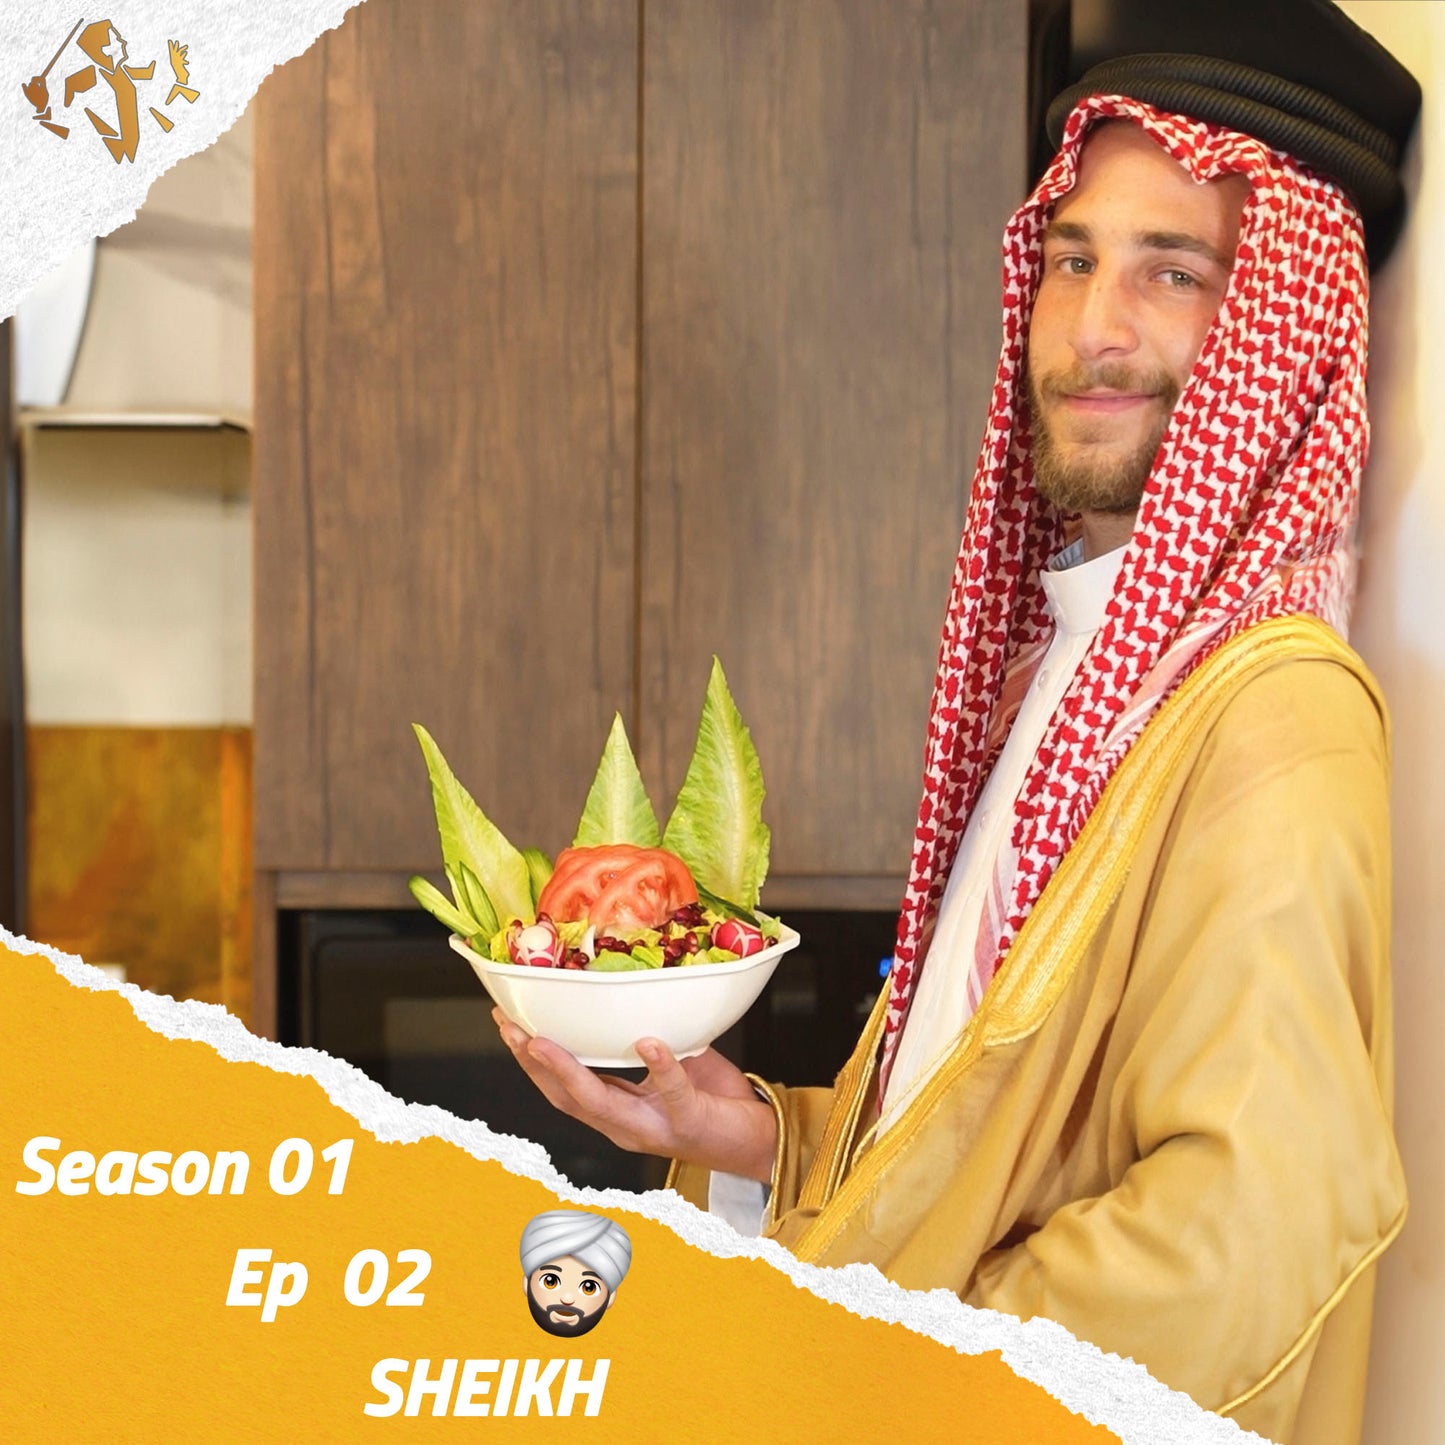 Cooking Day S01 EP02 The Sheikh